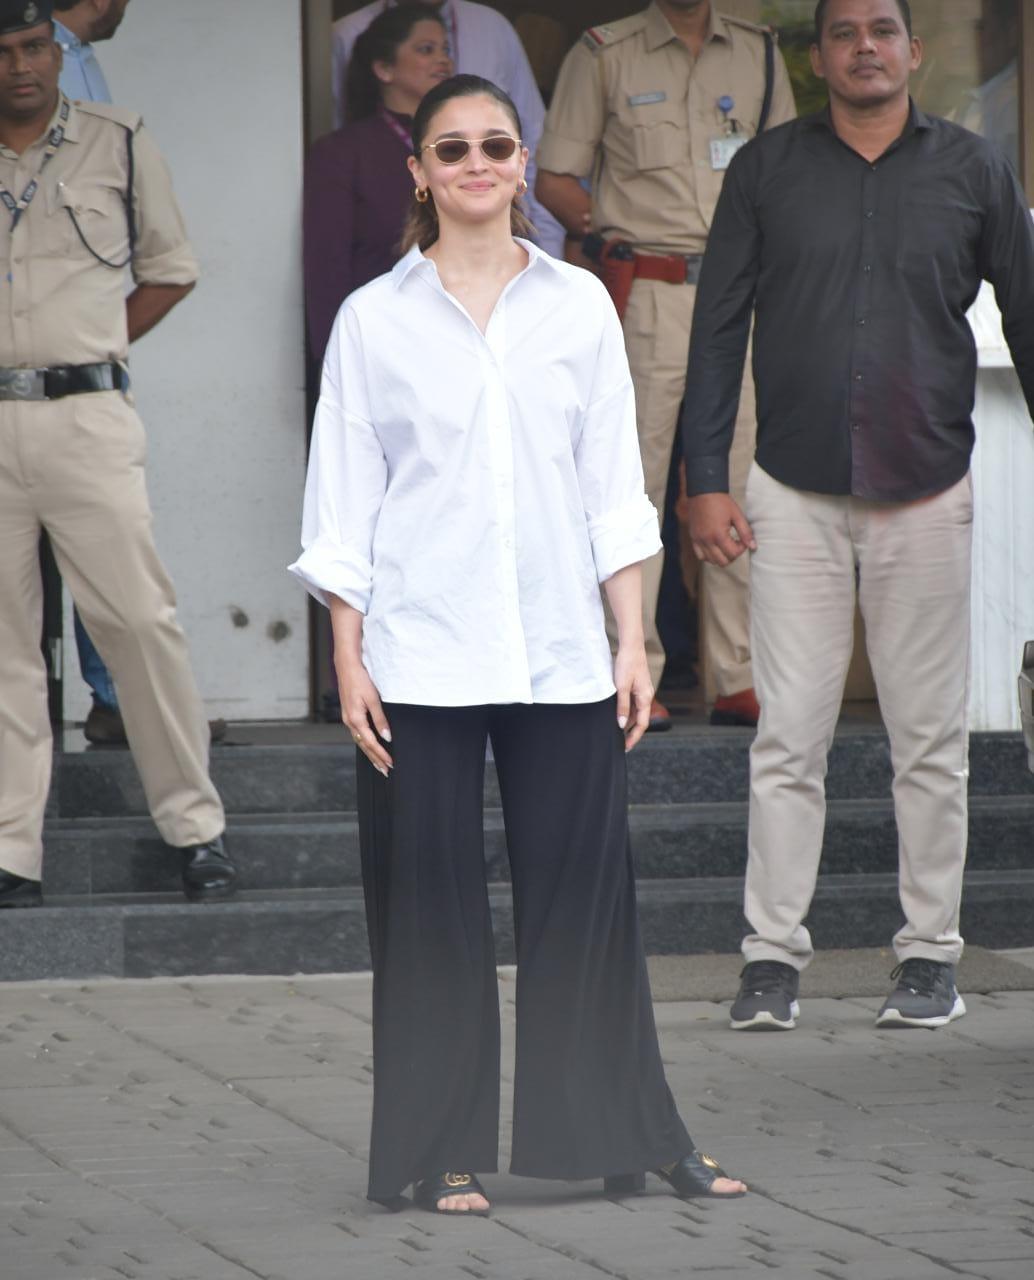 The star was dressed in an oversized white shirt with baggy black pants, creating a classic contrast between the two colors. She tied the whole look together with black sunglasses and her million dollar smile